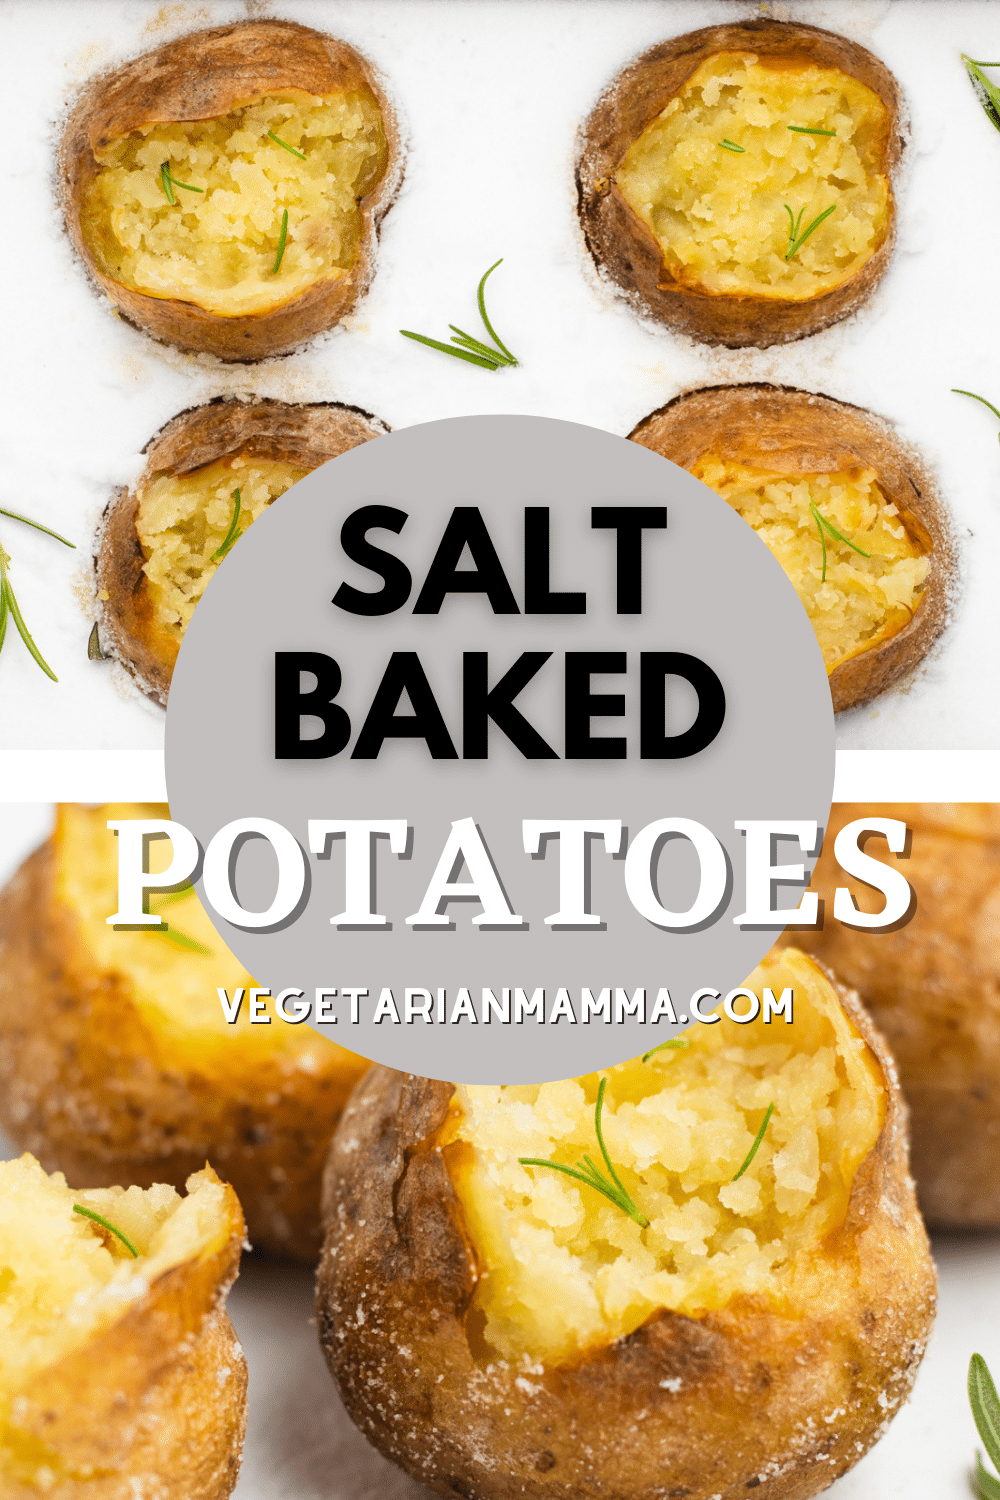 This recipe for Salt Baked Potatoes gives the perfect baked potato texture, with crispy, salty skin. Finish these with melted butter and fresh herbs and they'll make the perfect side dish for any meal.